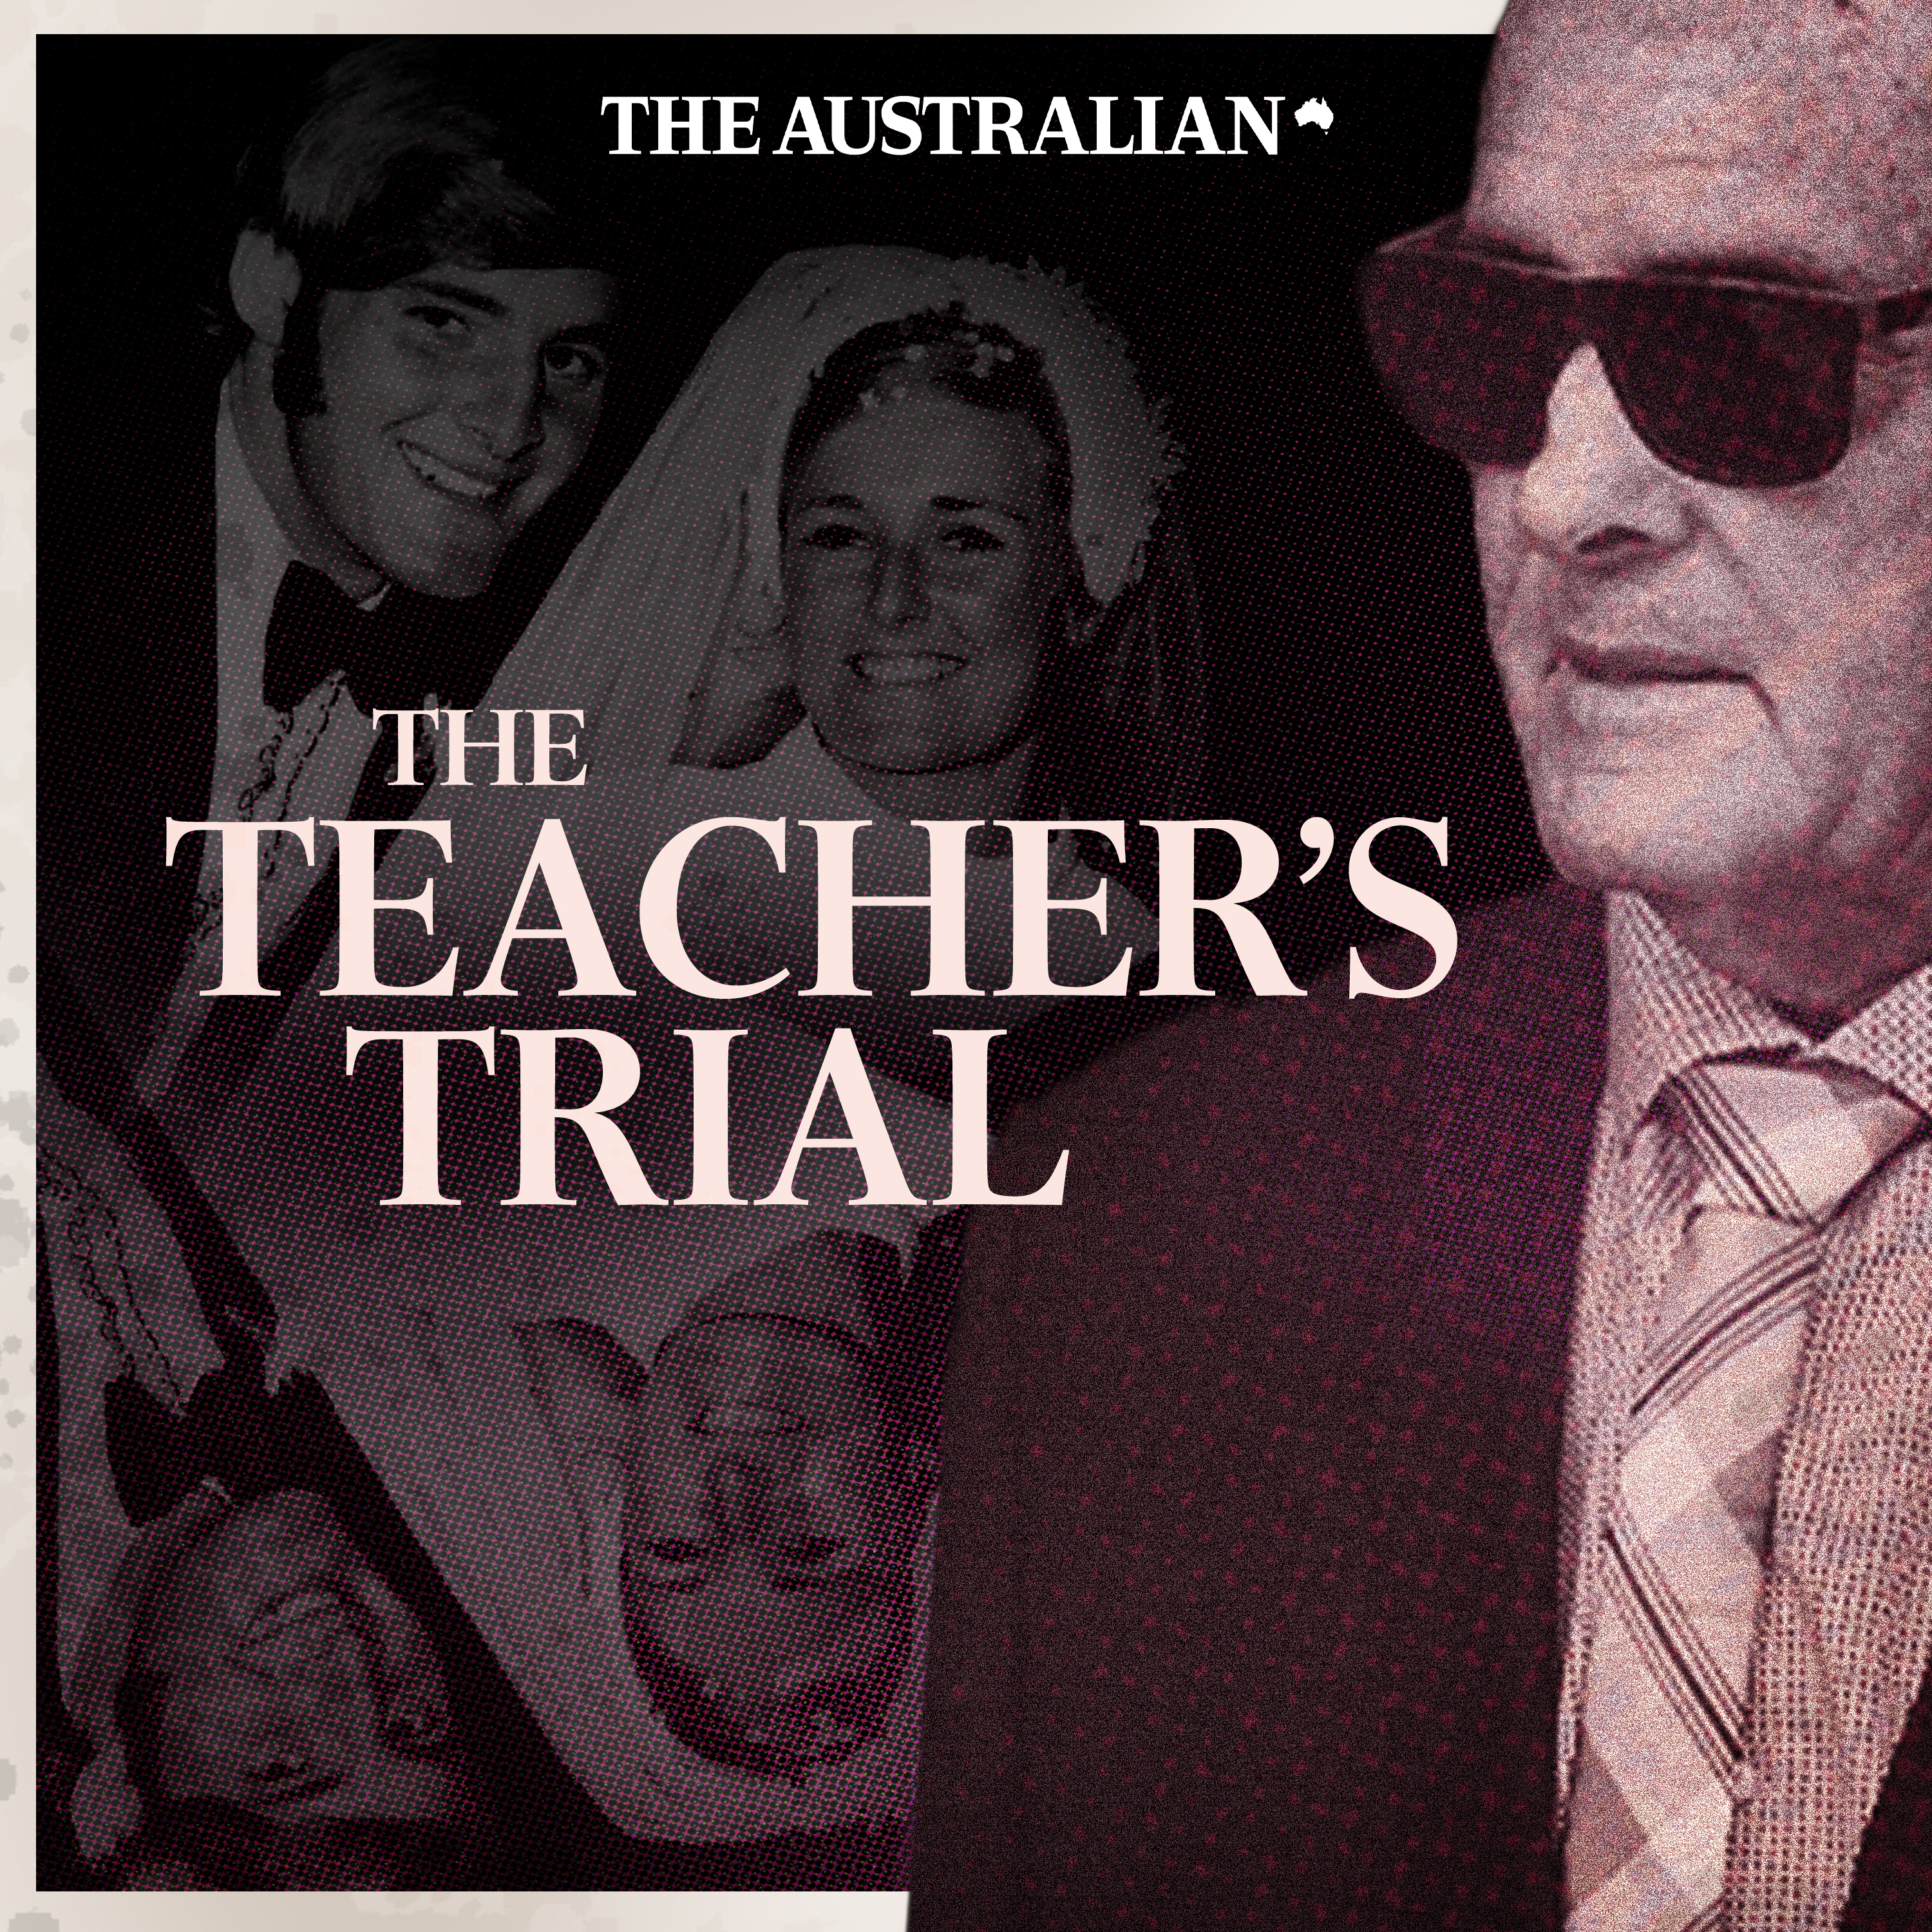 Introducing - The Teacher’s Trial